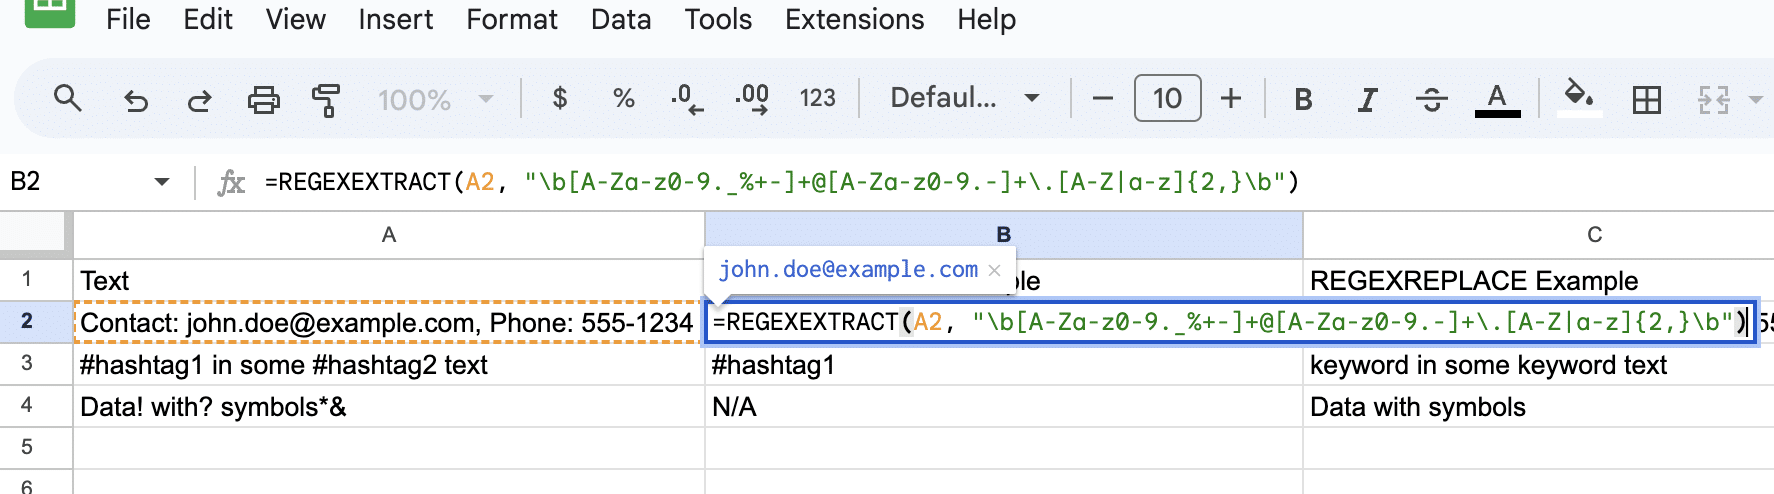 Isolating an email address with REGEXEXTRACT in Google Sheets from mixed text